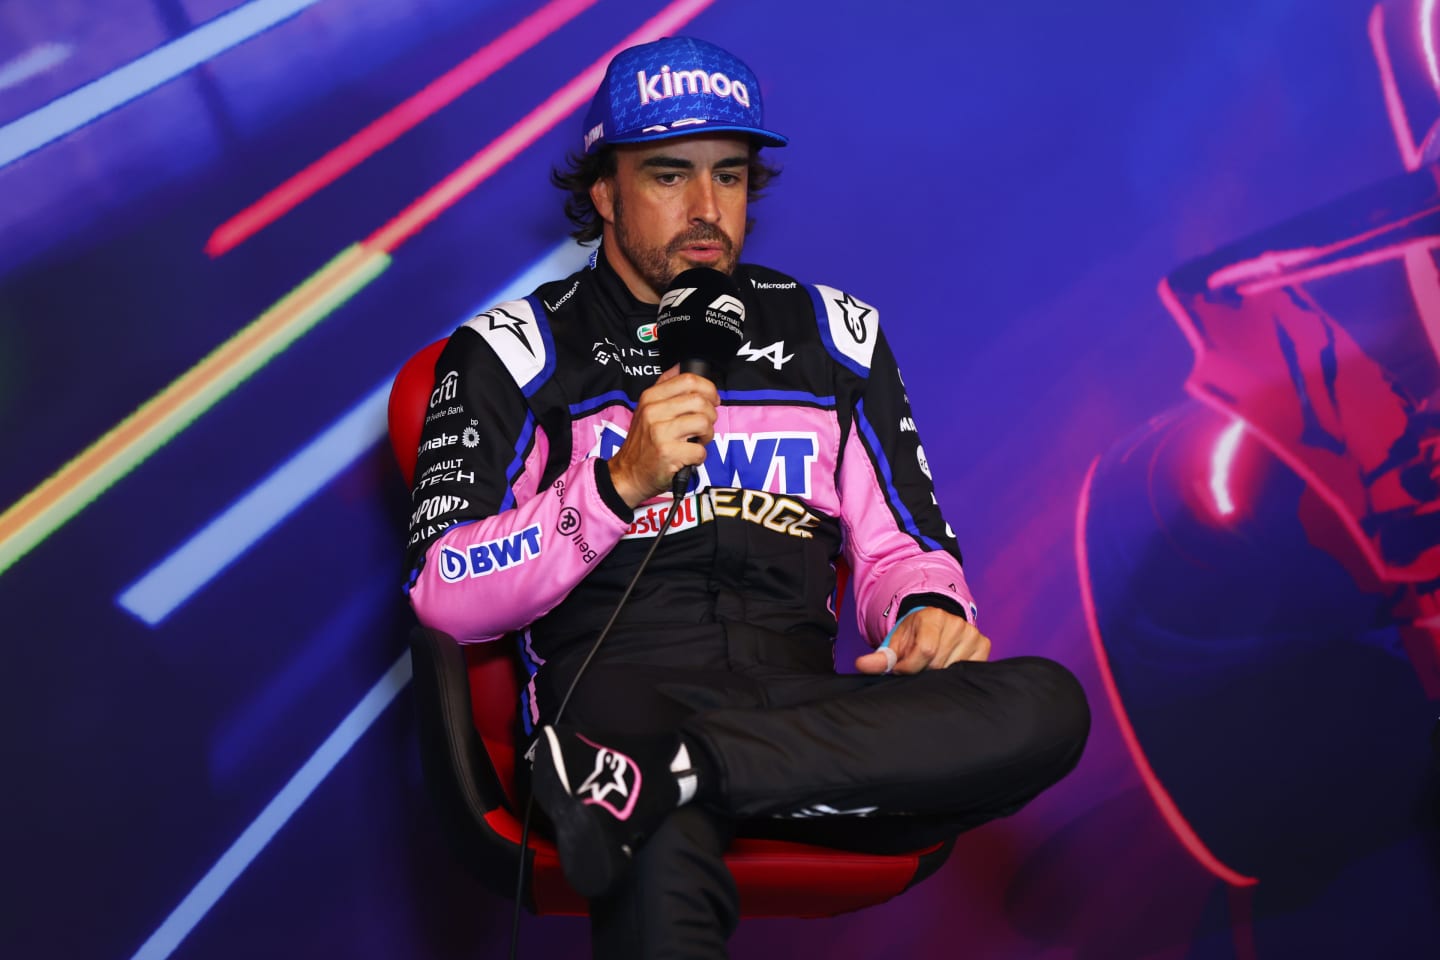 MONTREAL, QUEBEC - JUNE 18: Second placed qualifier Fernando Alonso of Spain and Alpine F1 attends the press conference after qualifying ahead of the F1 Grand Prix of Canada at Circuit Gilles Villeneuve on June 18, 2022 in Montreal, Quebec. (Photo by Lars Baron/Getty Images)